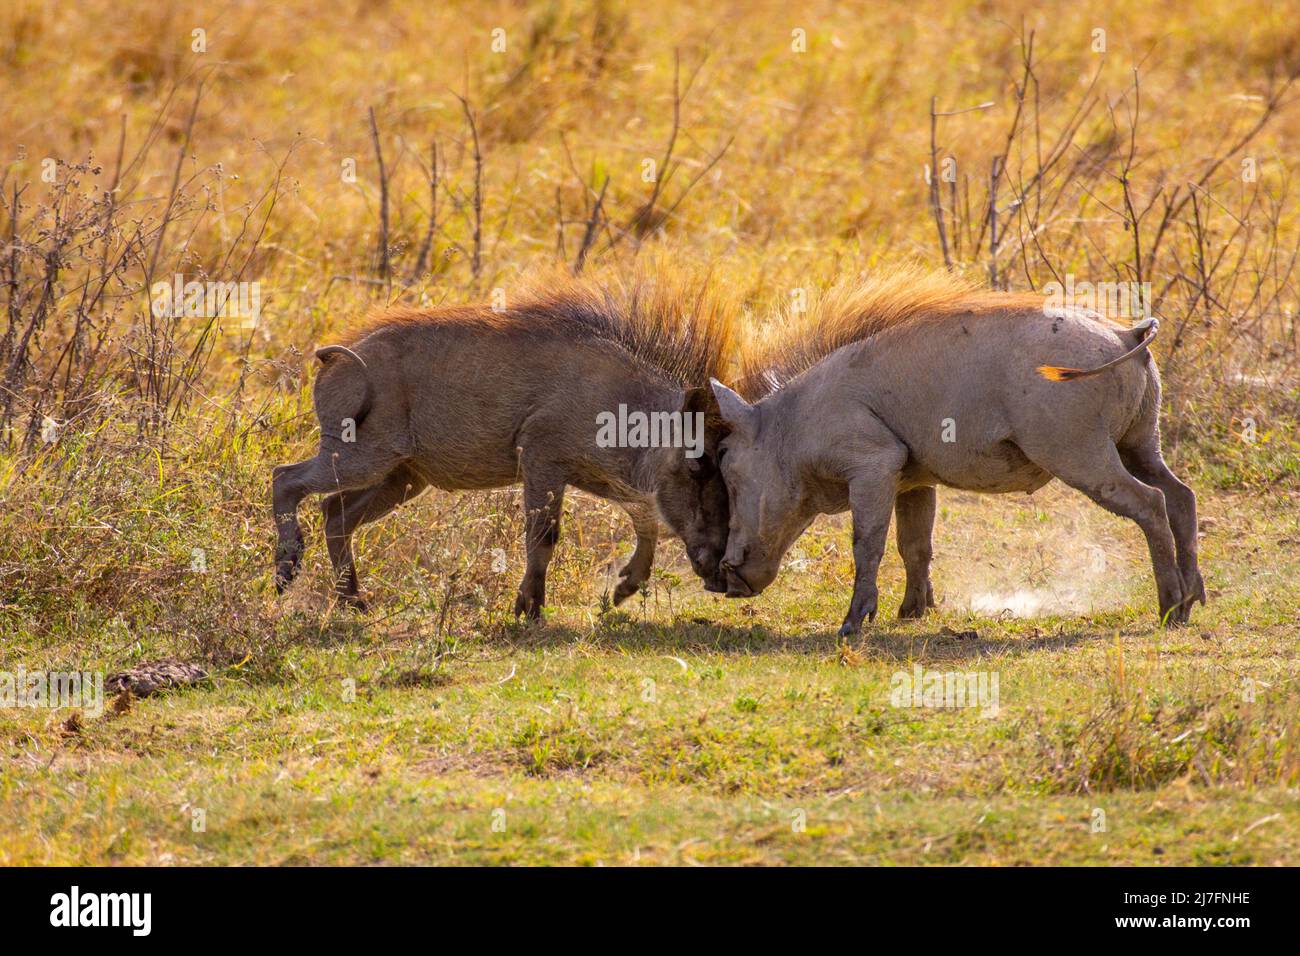 two male Warthogs (Phacochoerus africanus) fighting. Photographed in Tanzania Stock Photo